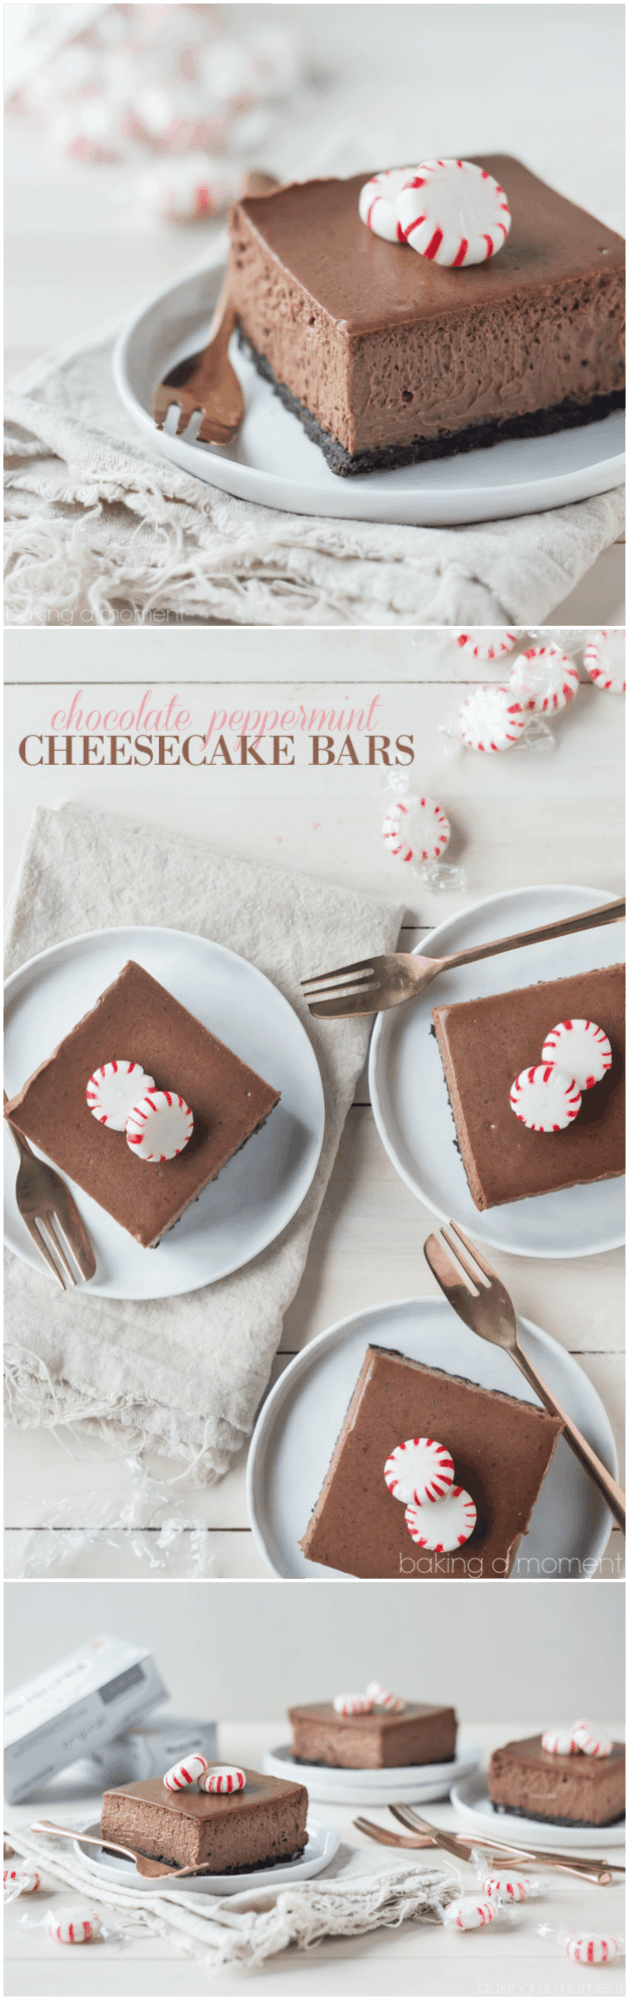 I made these Chocolate Peppermint Cheesecake Bars for Christmas and they were a huge hit! The cheesecake is so chocolate-y and creamy, and I loved that cool hit of peppermint! @spreadphilly #OneAndOnlyPhilly #HolidaysAreMadeWith #spon